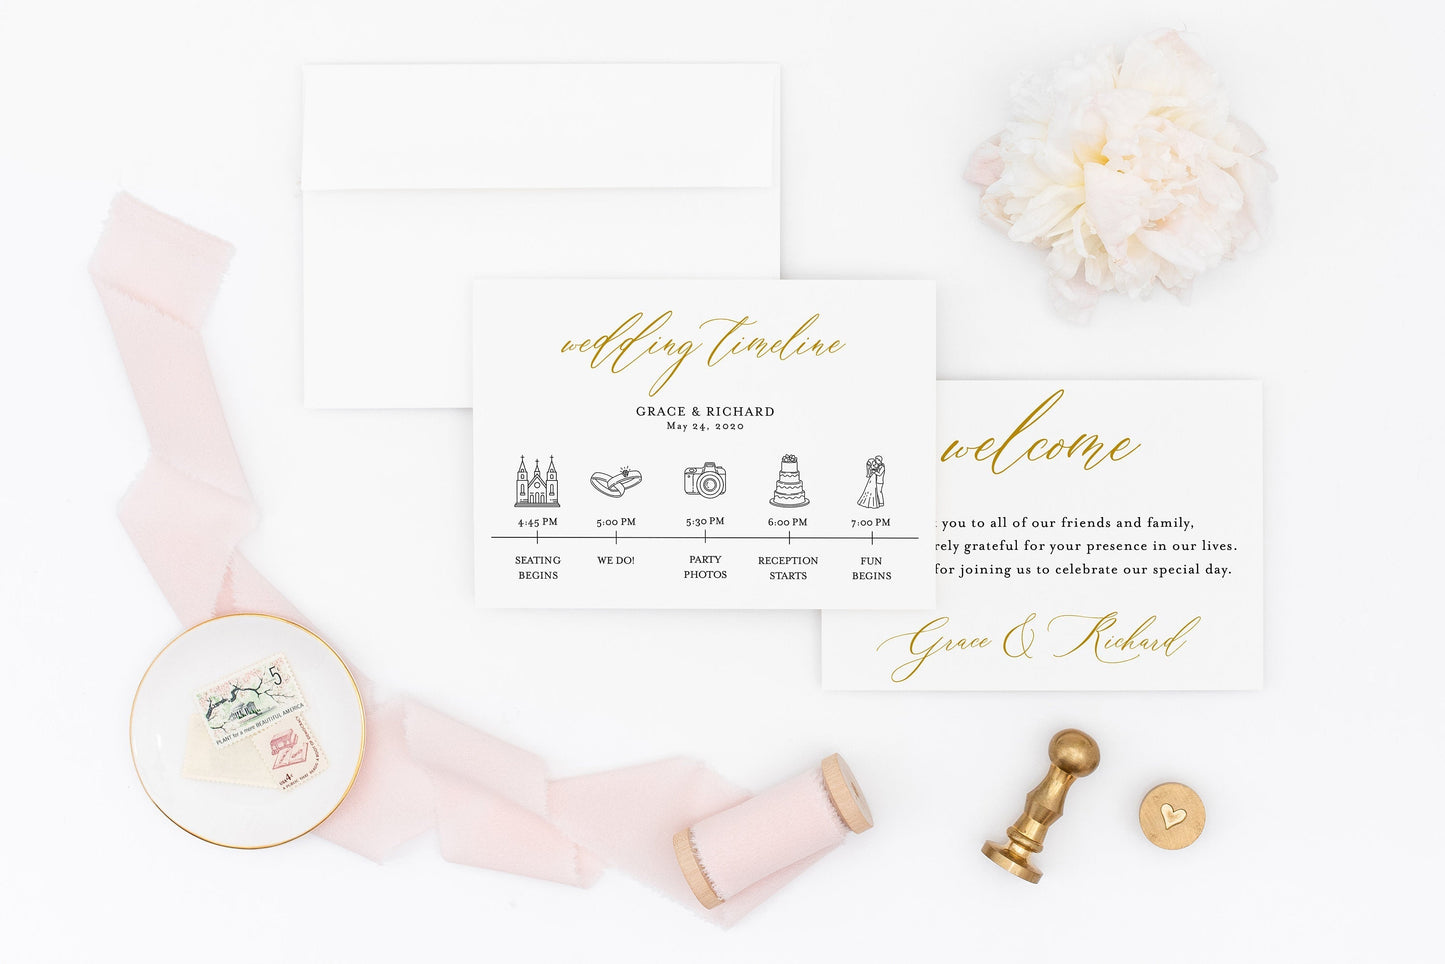 Printable Wedding Itinerary Template Card Timeline Welcome, 100% editable Templett - Grace MENU|PROGRAMS|TIMELINE SAVVY PAPER CO